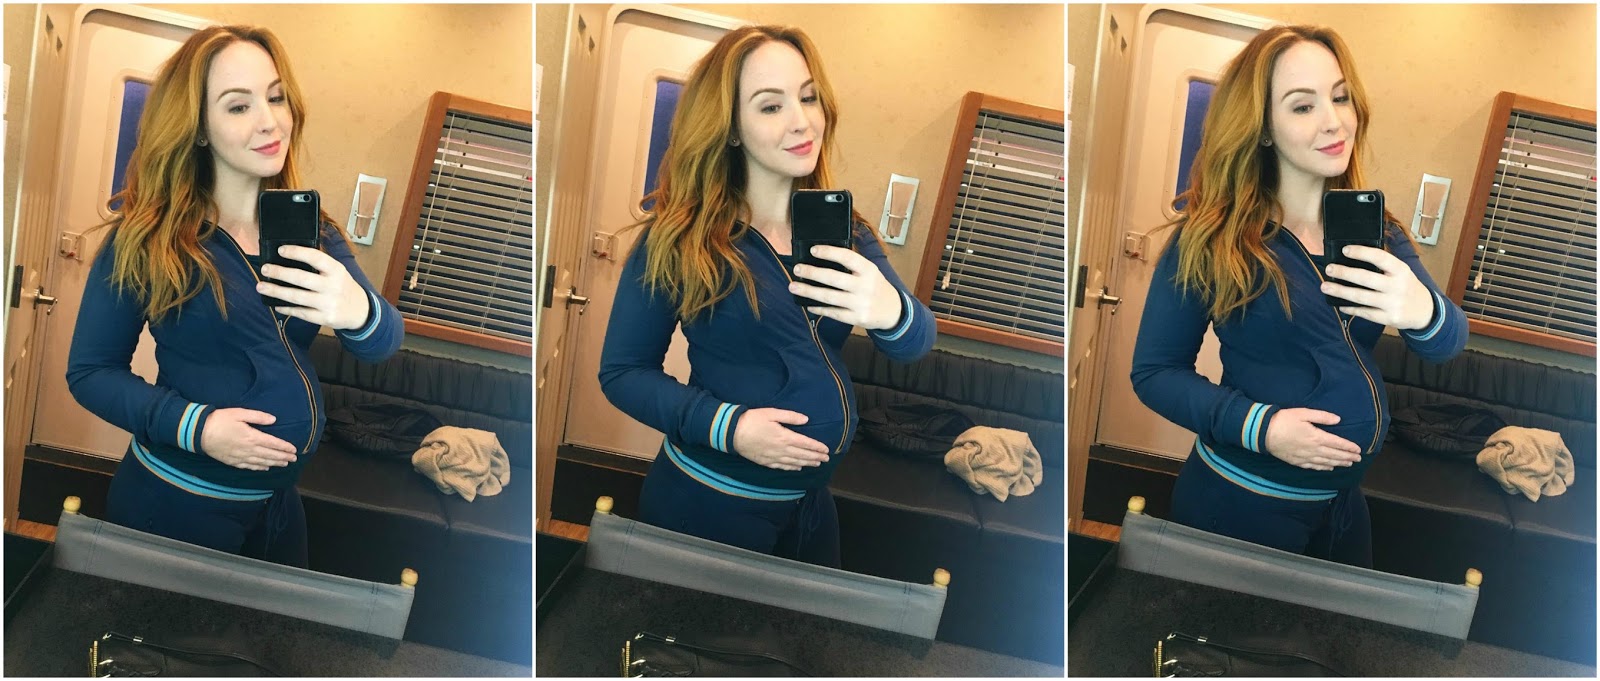 Are you wondering why Camryn Grimes look pregnant in the photo above, a pho...